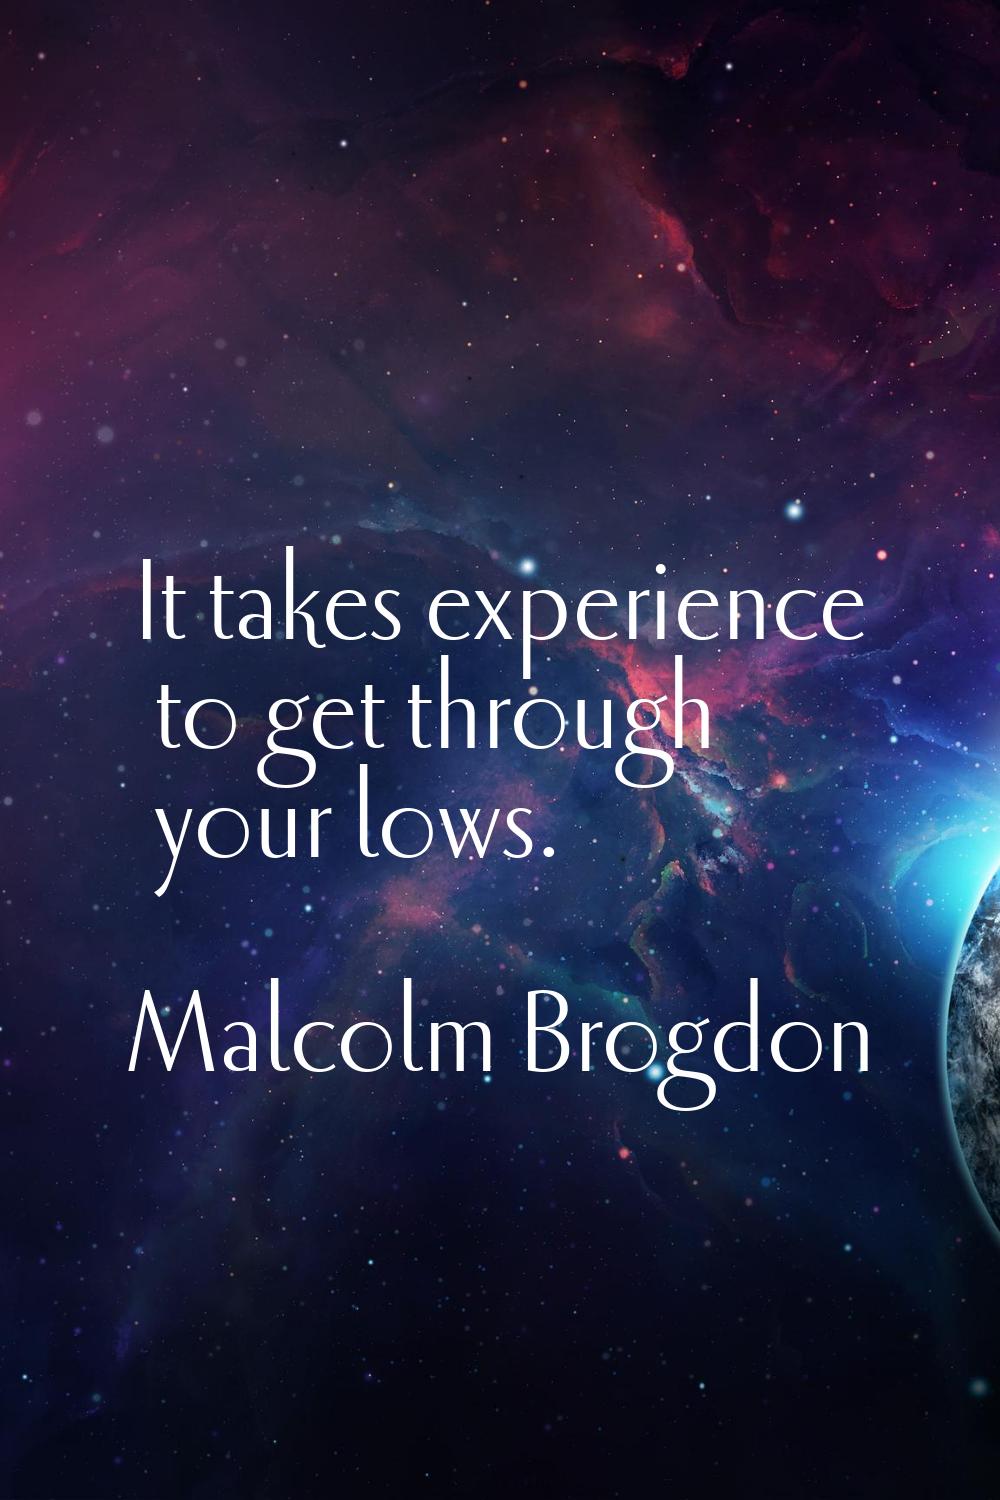 It takes experience to get through your lows.